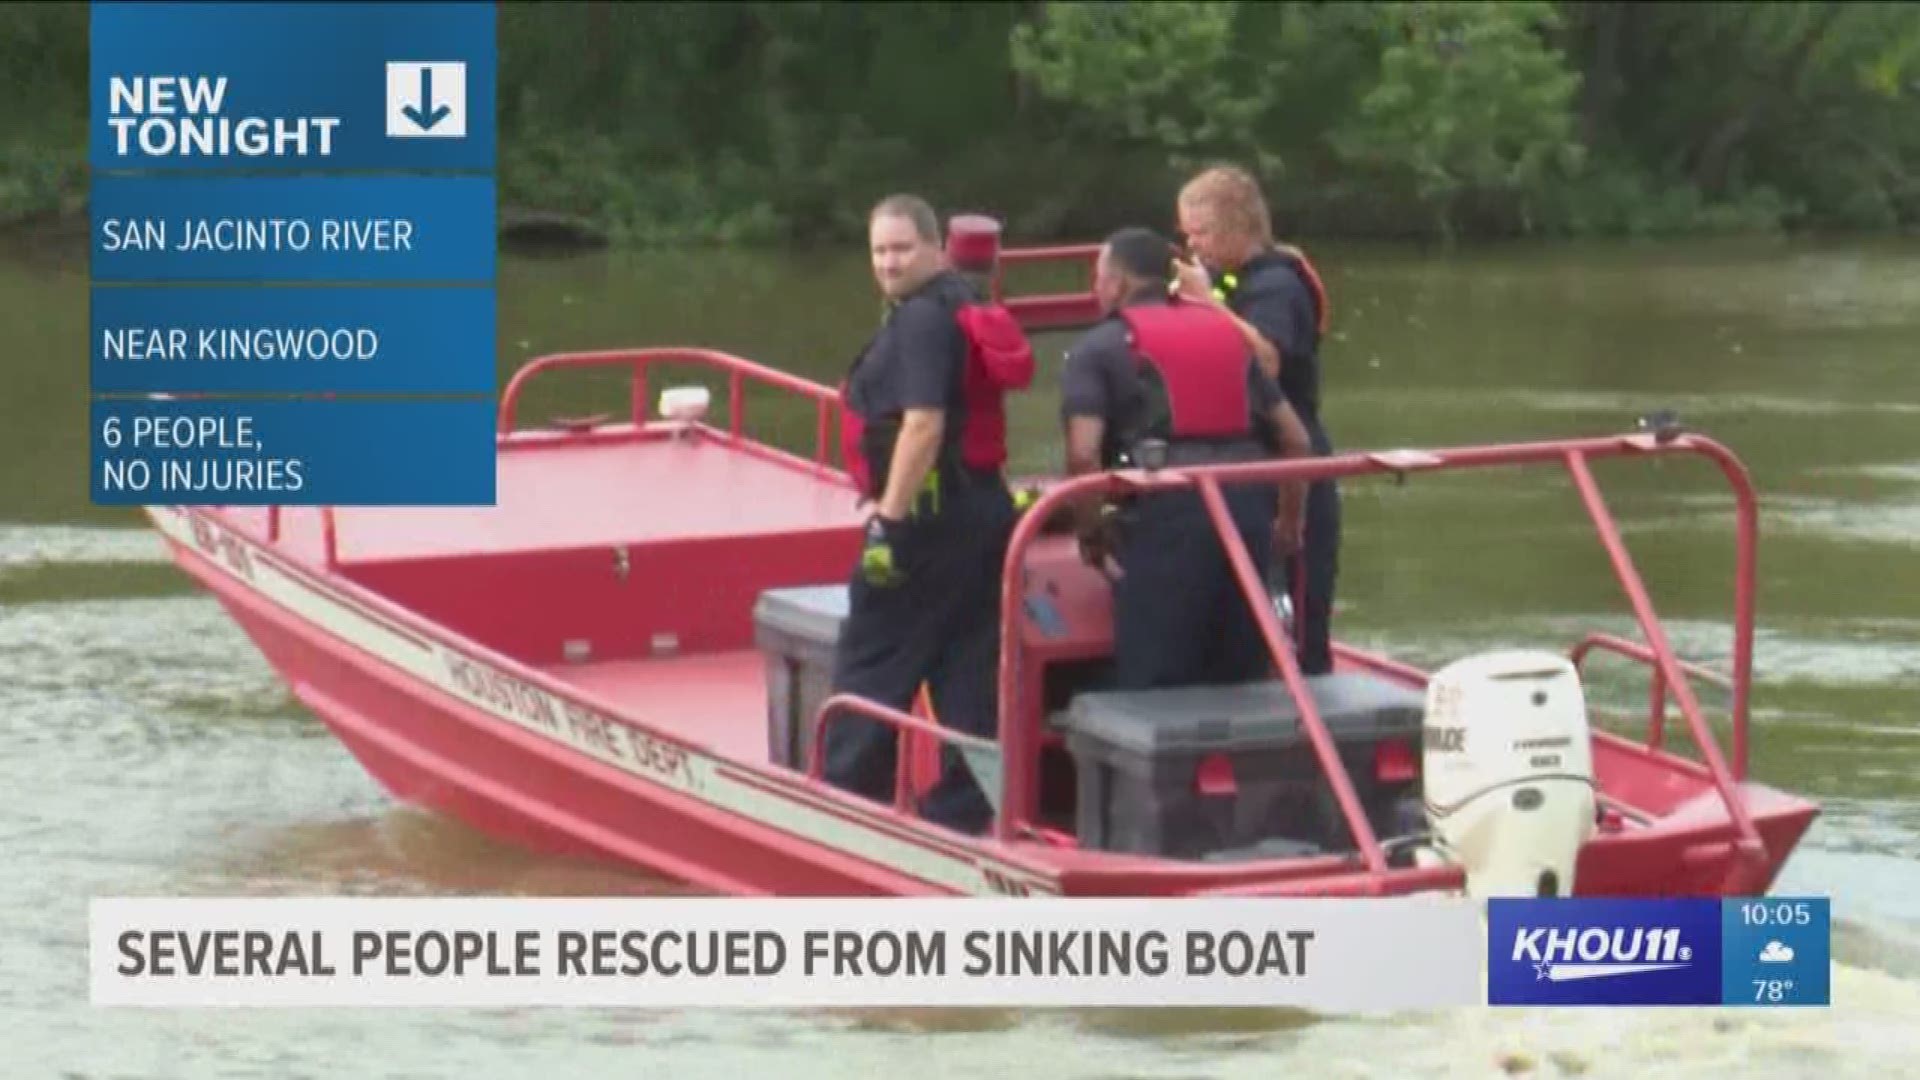 Six people had to be rescued in the San Jacinto River after their boat hit a stump and started taking on water. They managed to swim to a nearby sandbar where another boater picked them up. 